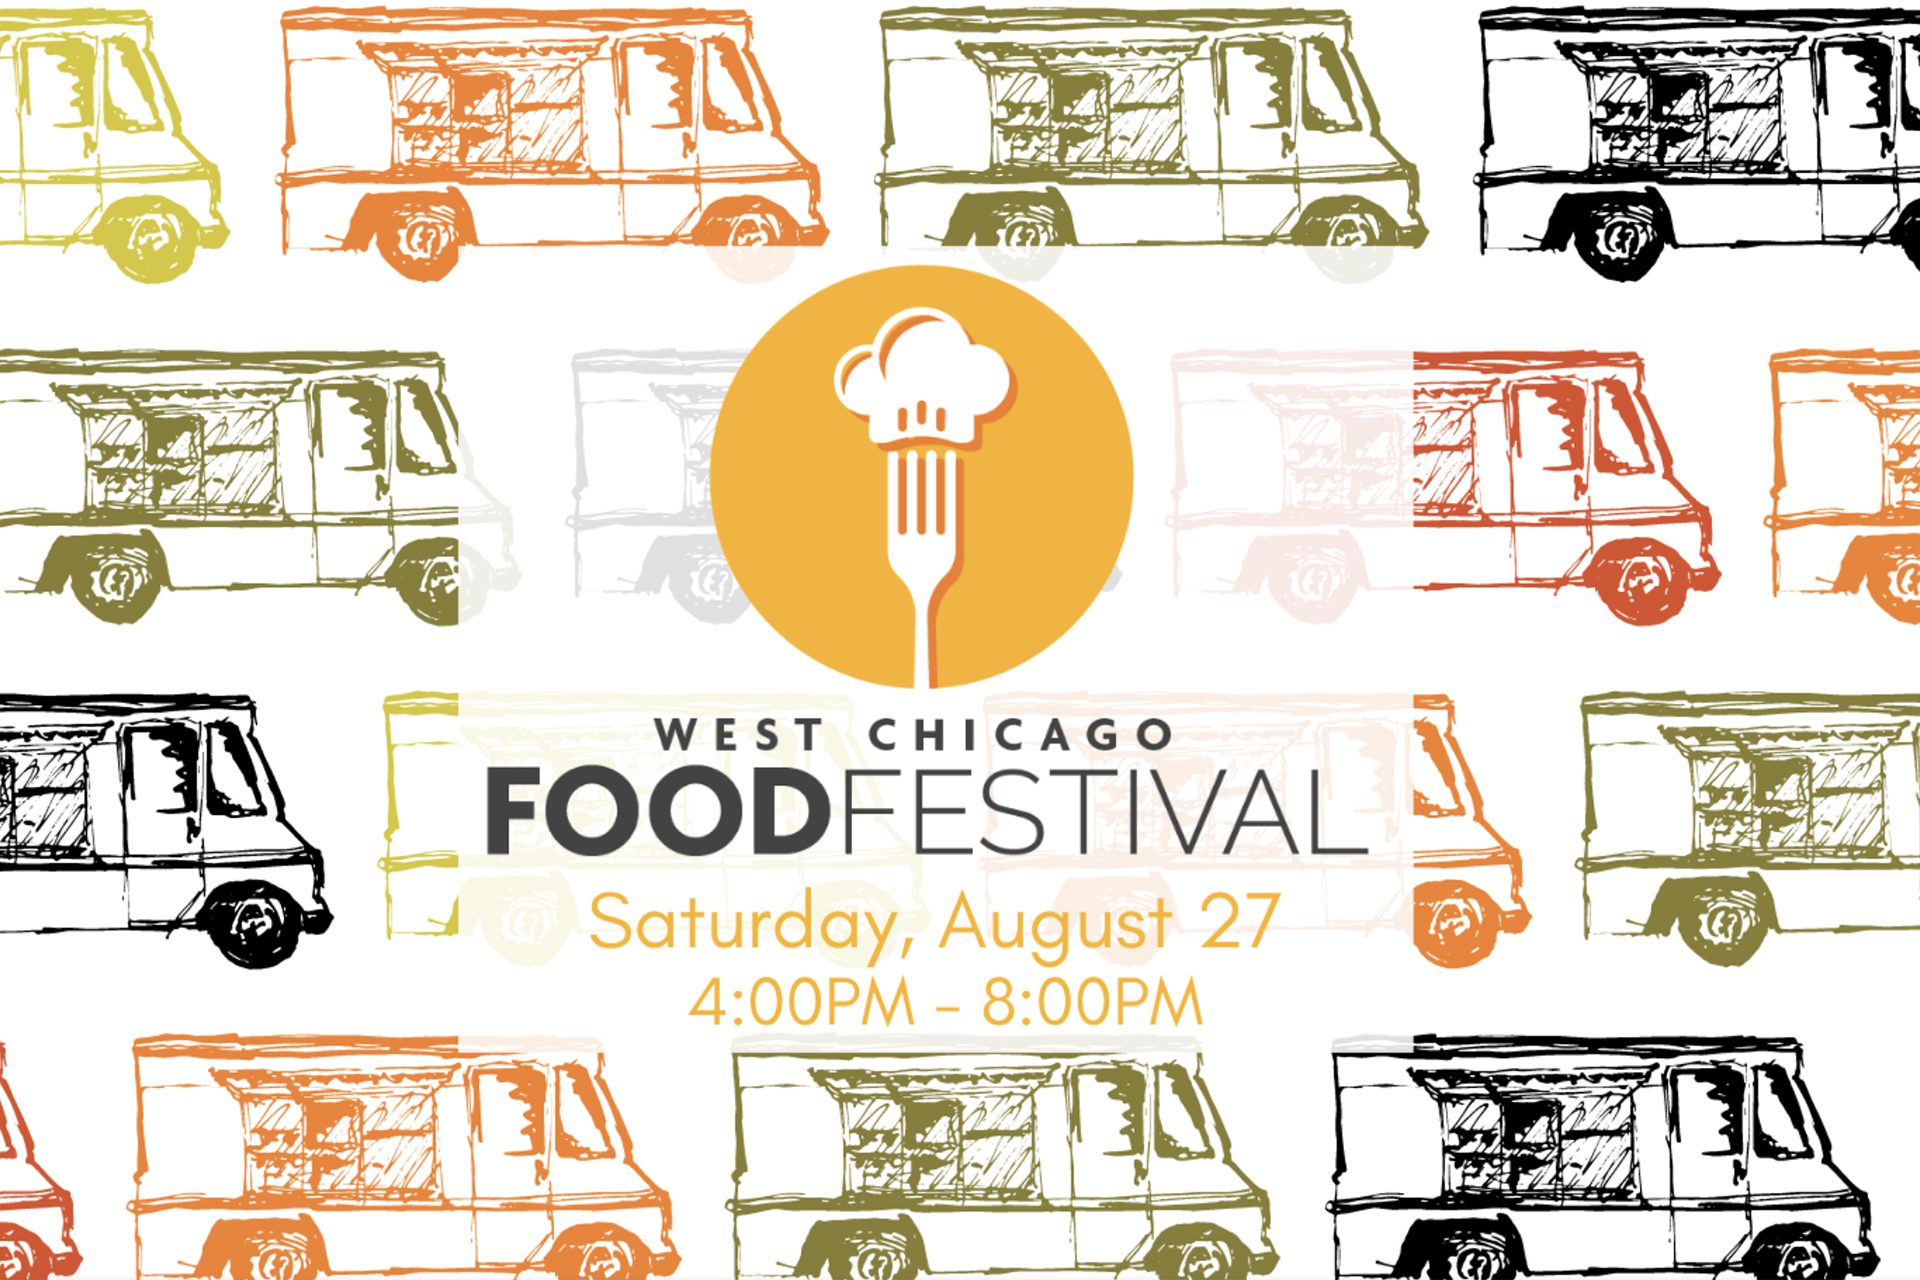 "West Chicago Food Festival Saturday Aug. 27 4-8 pm"